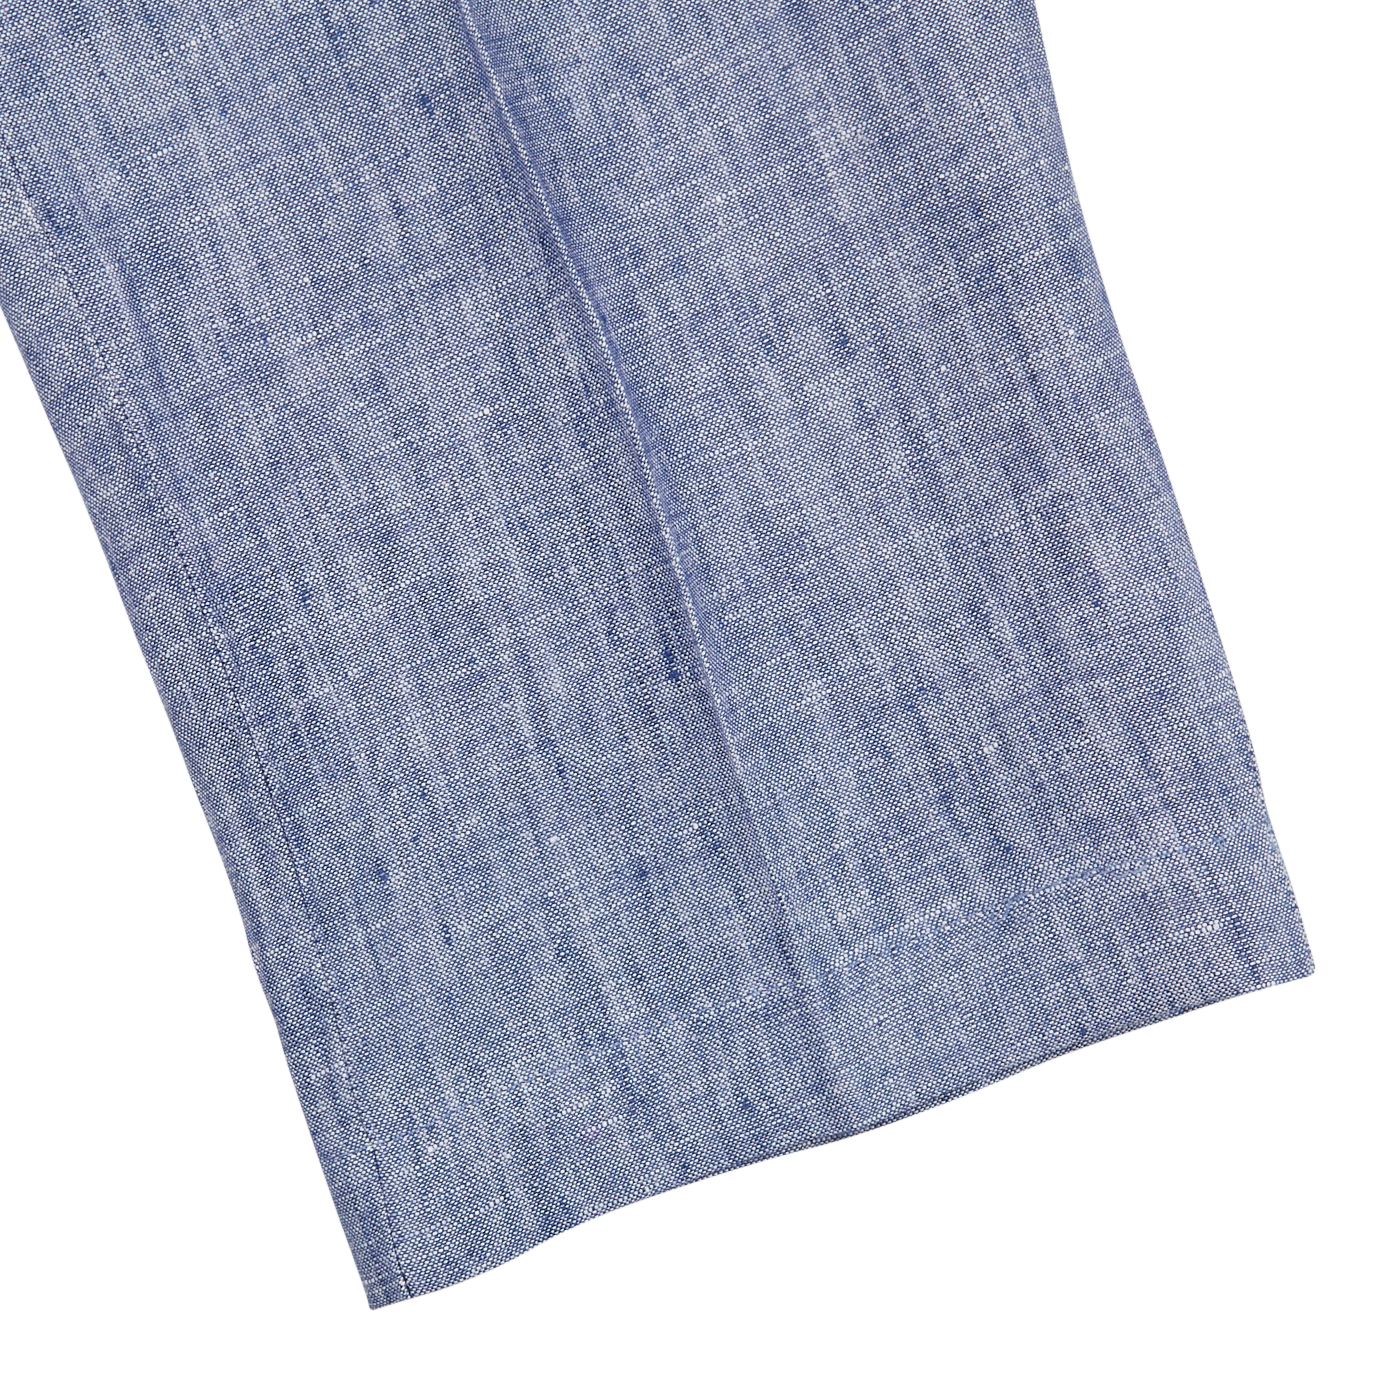 Close-up of a folded light blue melange linen fabric with a visible texture, isolated on a white background.